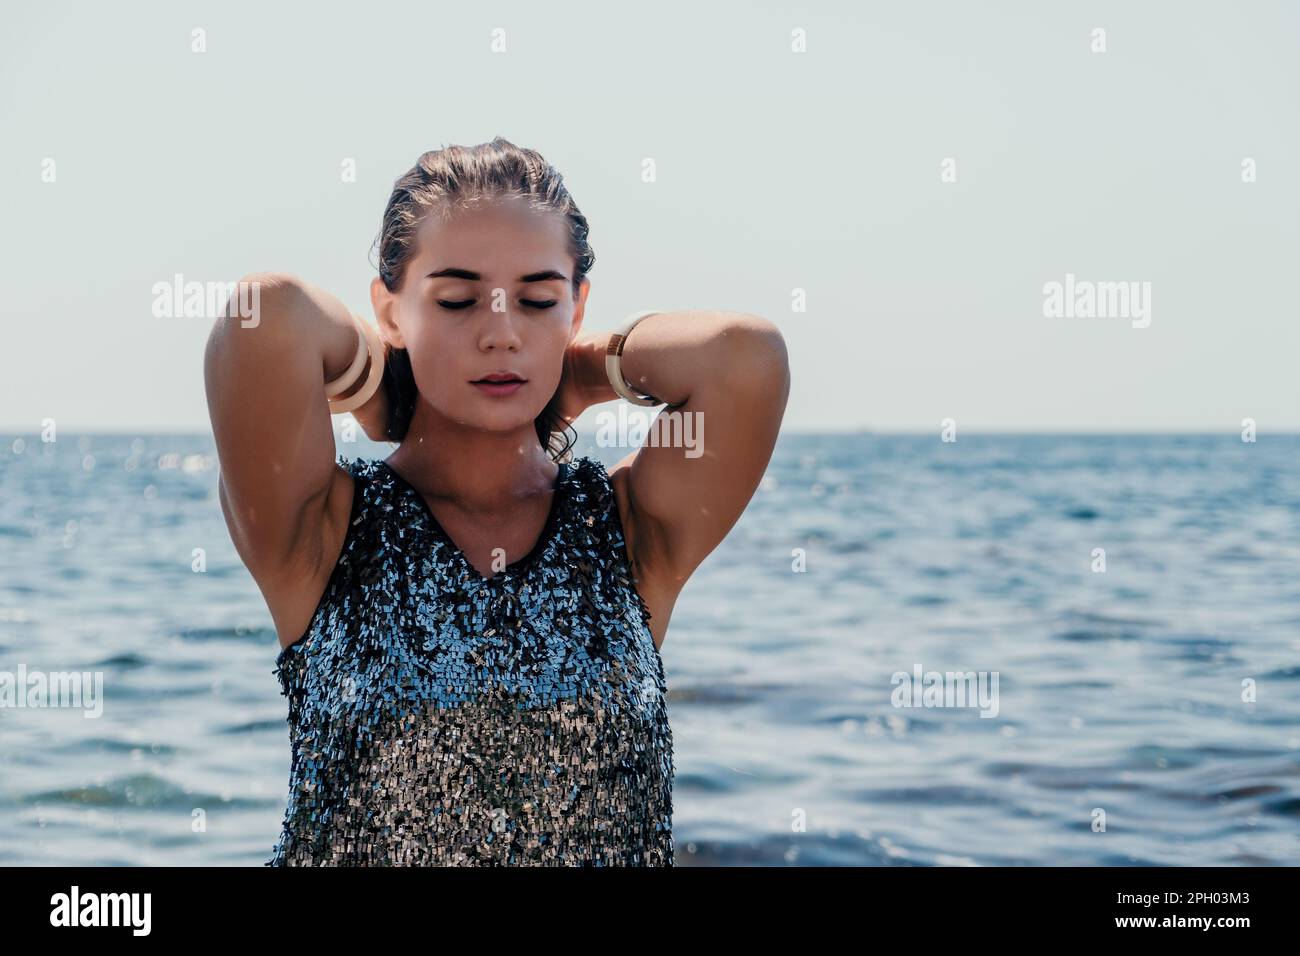 Woman summer travel sea. Happy tourist enjoy taking picture outdoors for memories. Woman traveler posing on the beach at sea surrounded by volcanic Stock Photo